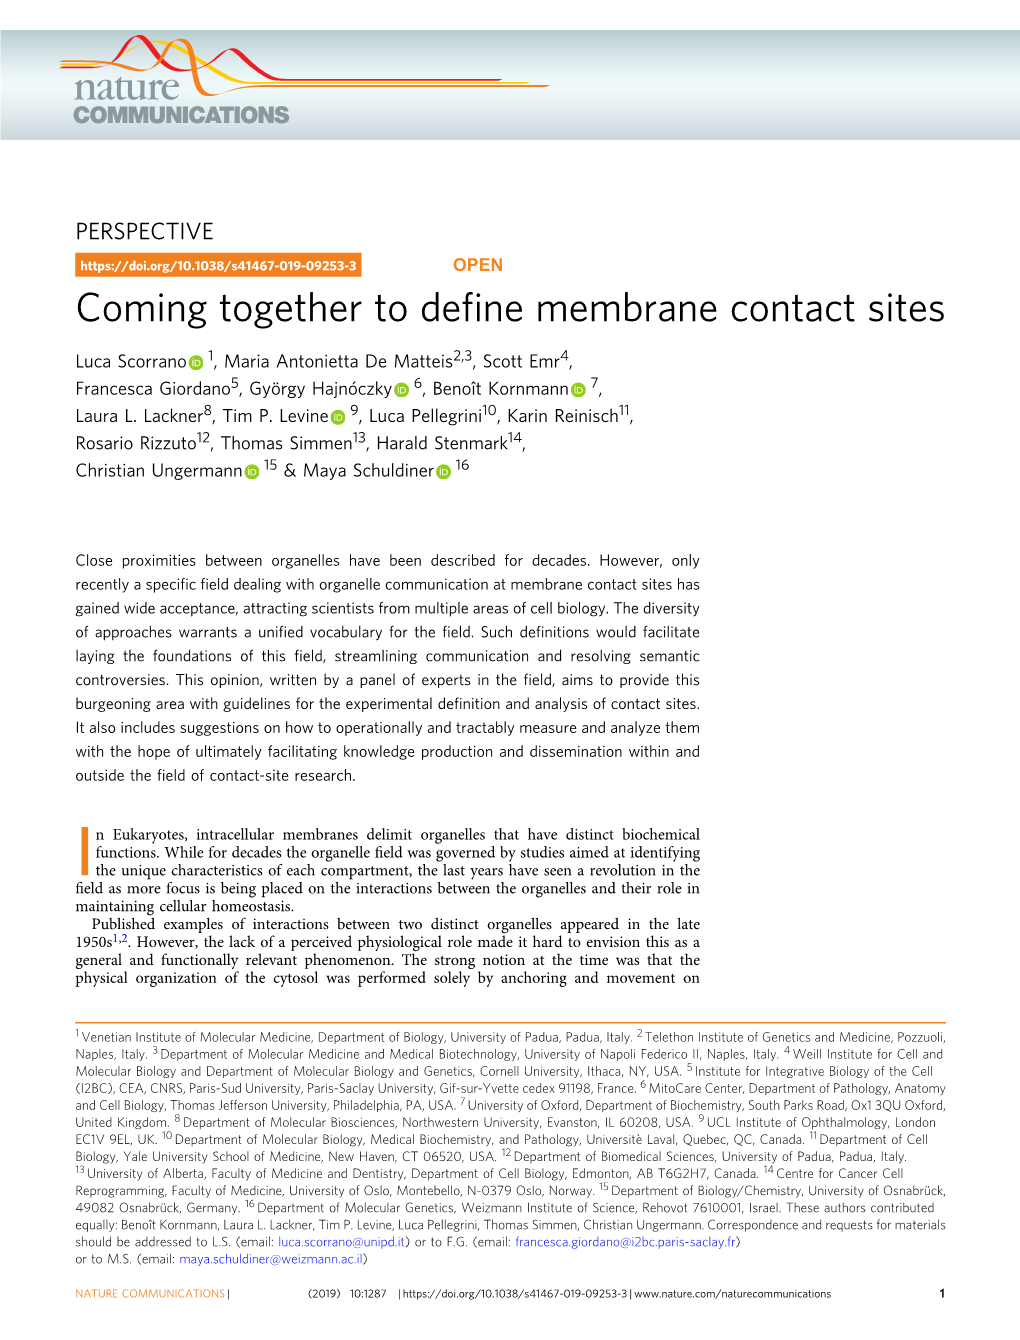 Coming Together to Define Membrane Contact Sites